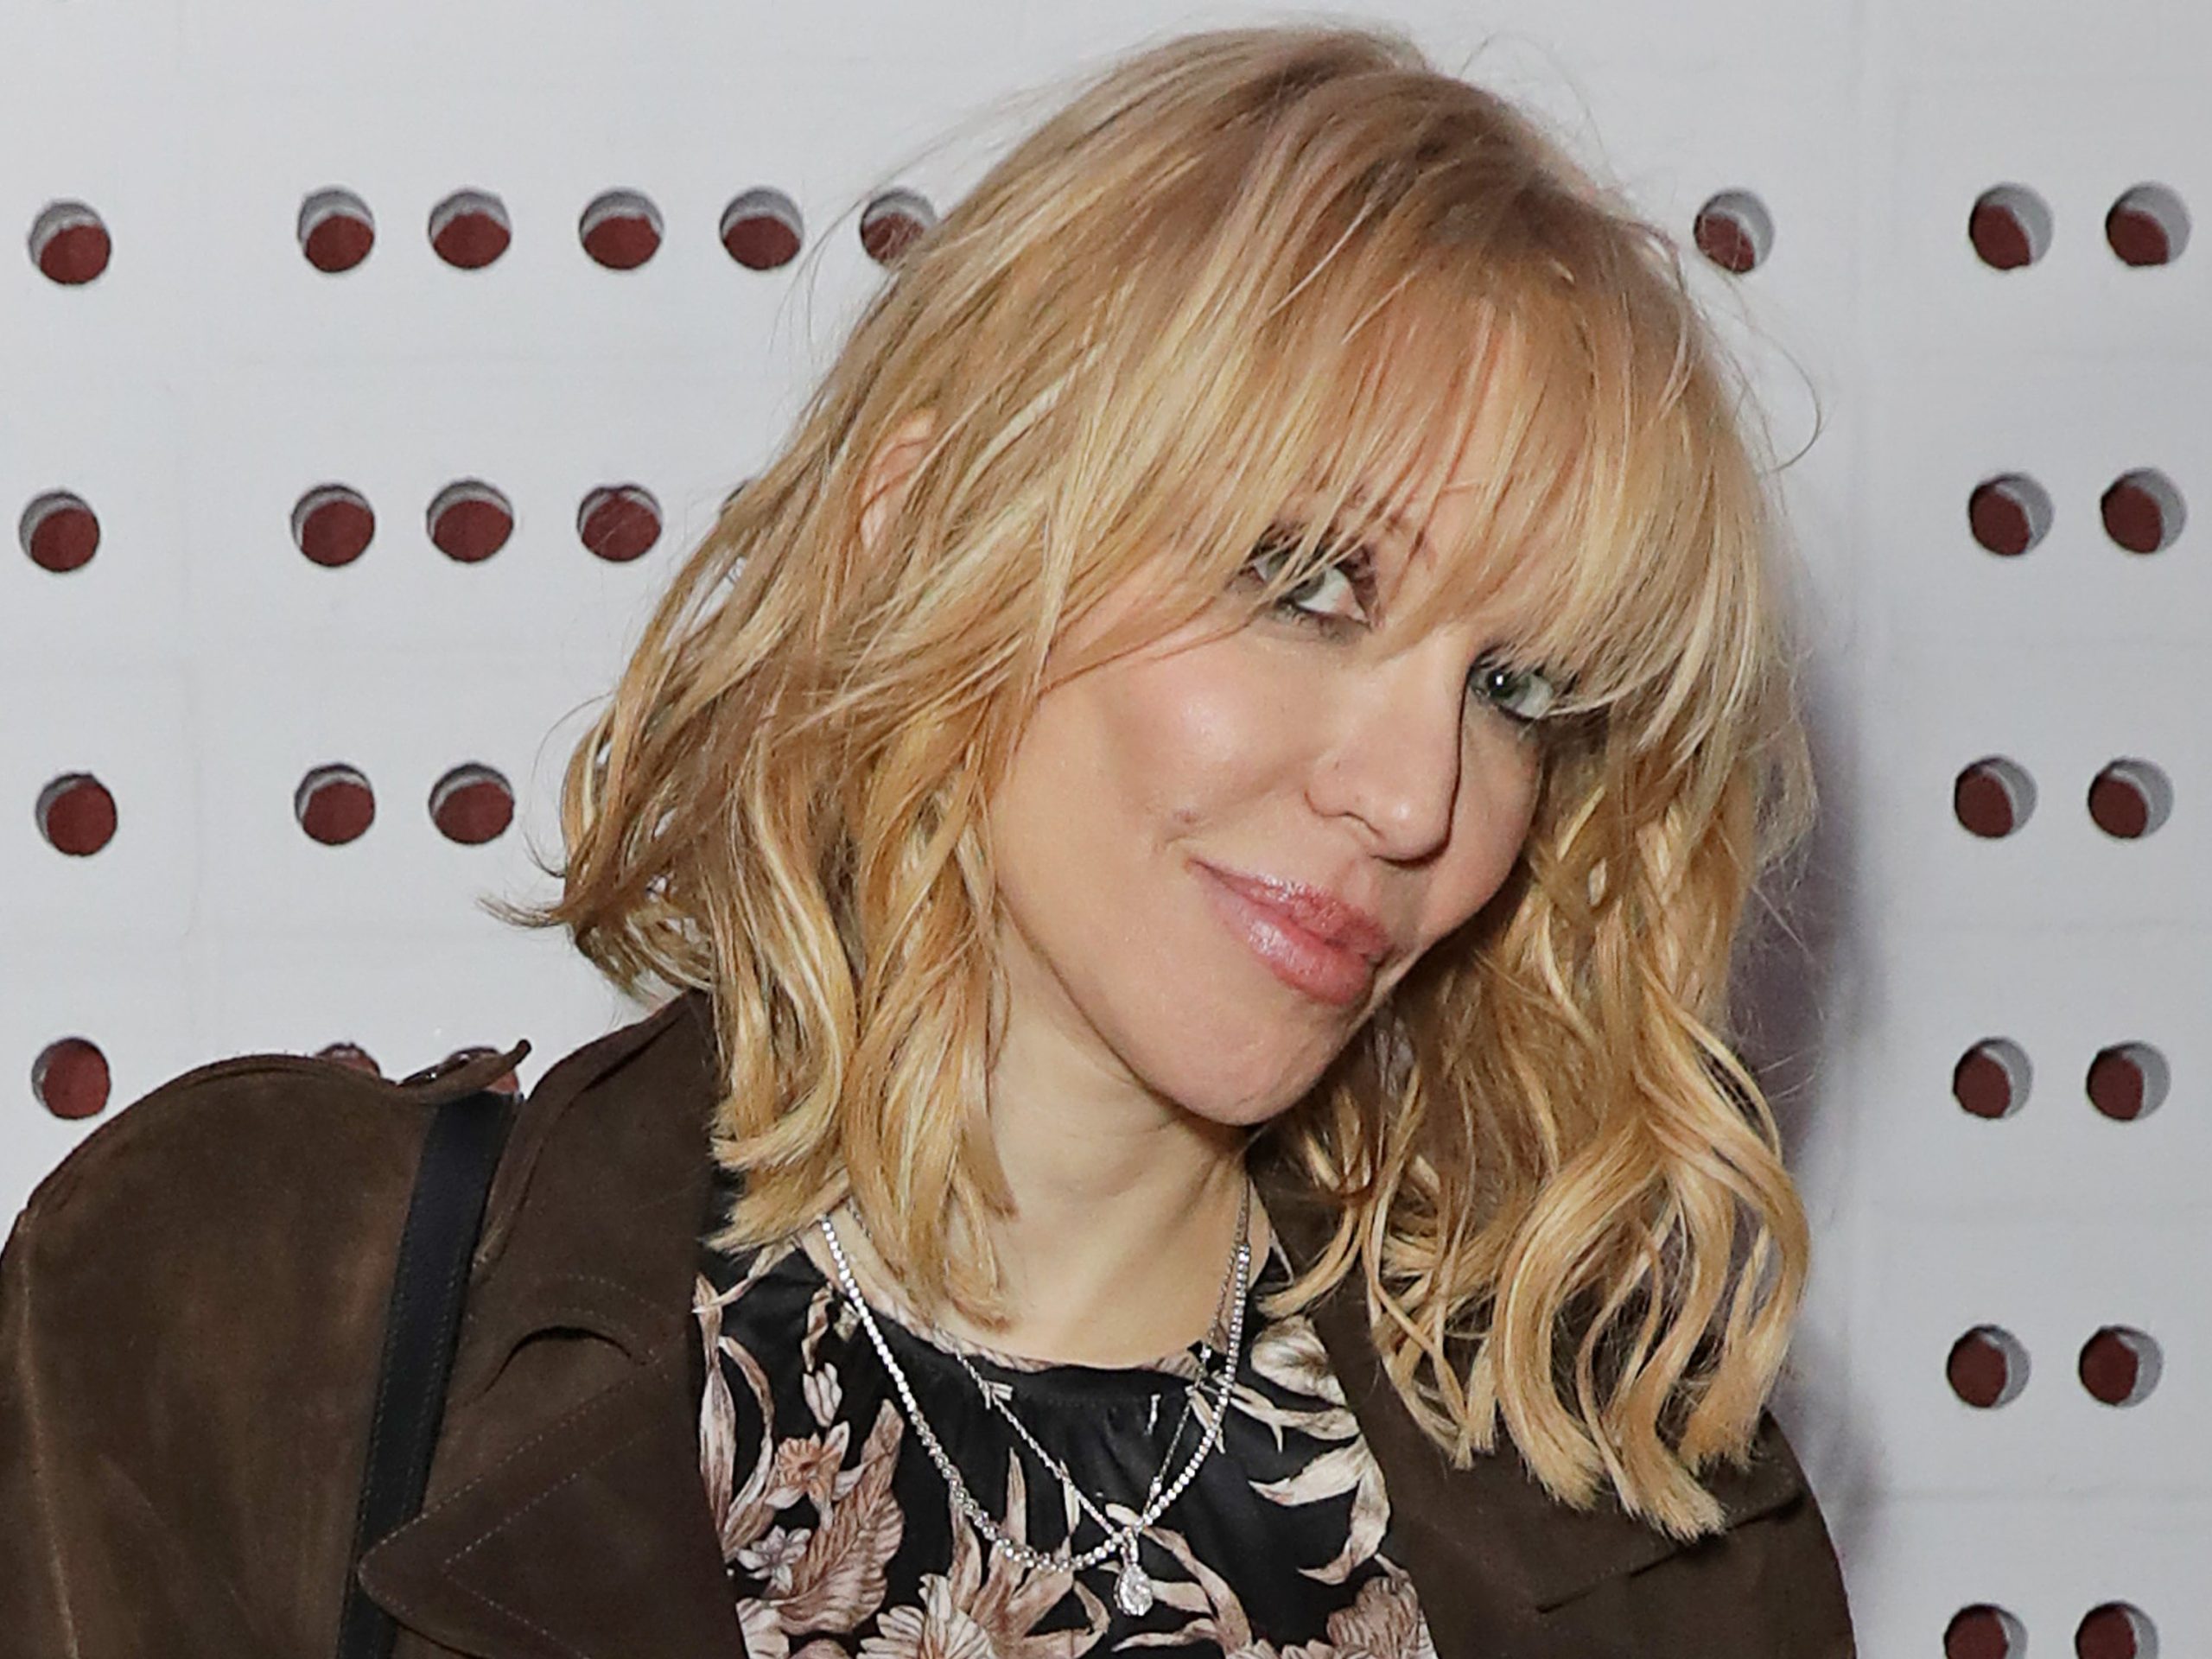 How Rich is Courtney Love